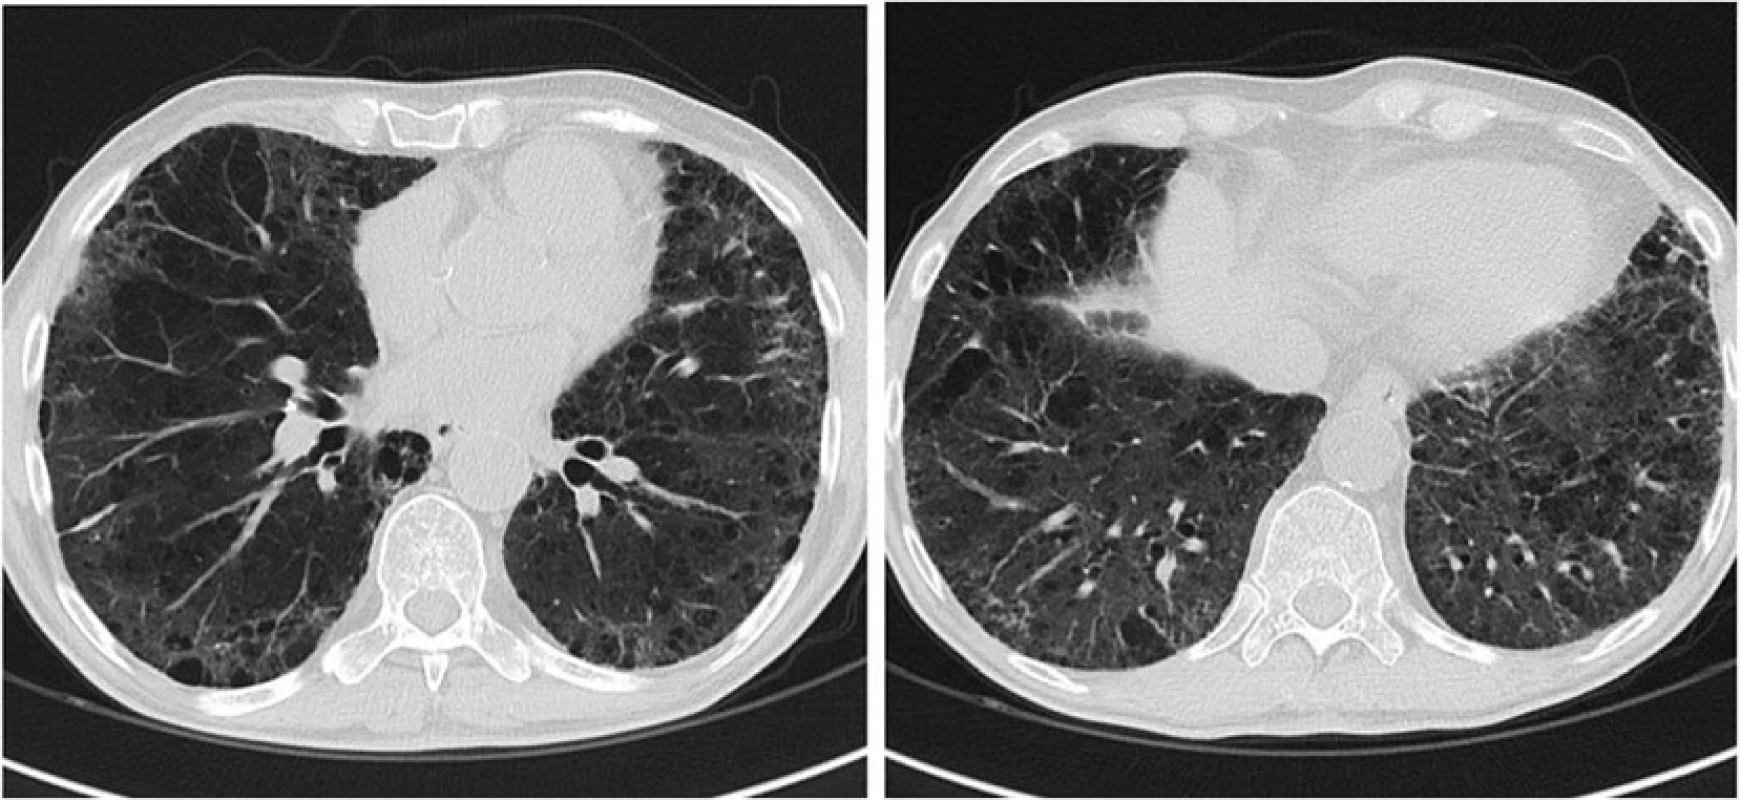 Chest CT scan image obtained 1 month after the start of imatinib mesylate demonstrates resolution of ground-glass opacities and parenchymal consolidation